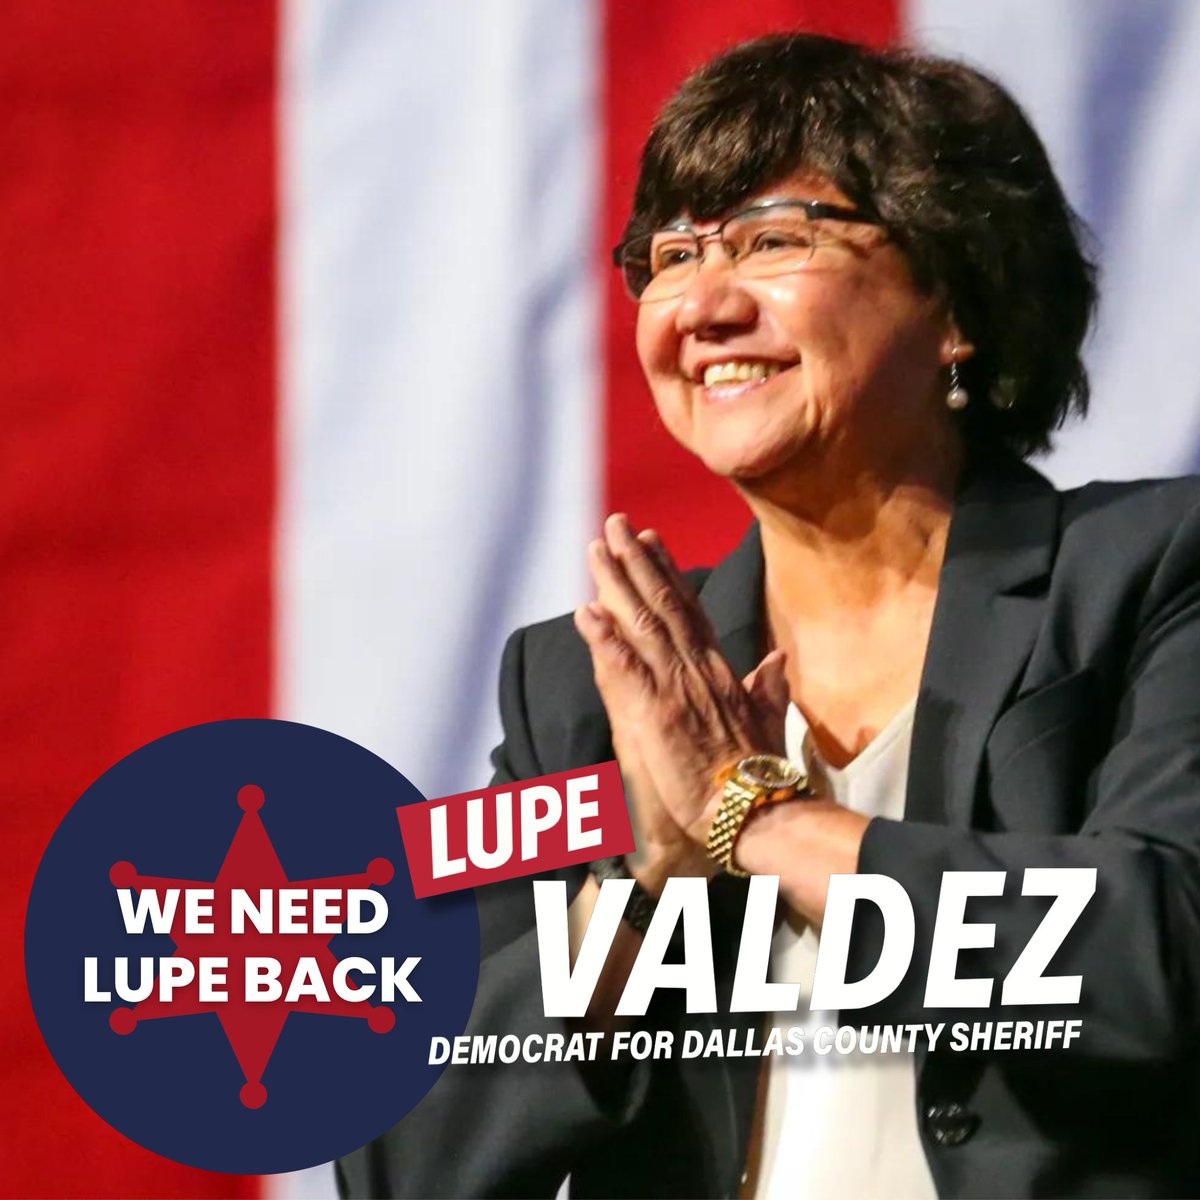 I'm bringing 13 years of experience leading the 7th largest Sheriff's department, I'm committed to unity and progress in Dallas County. Let's work together for a brighter future! #DallasCounty #VoteLupeValdez